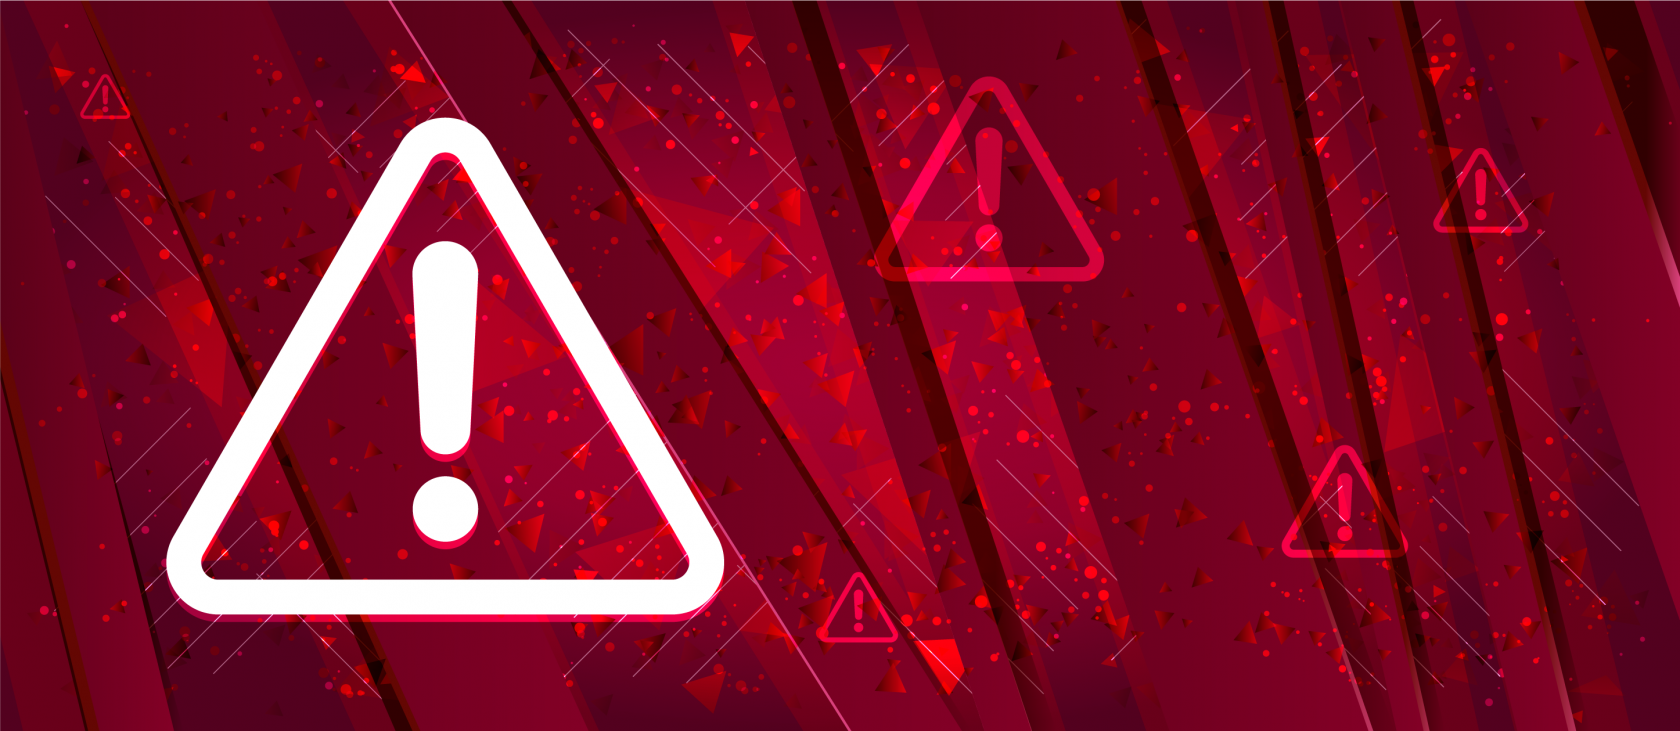 Warning sign on red background